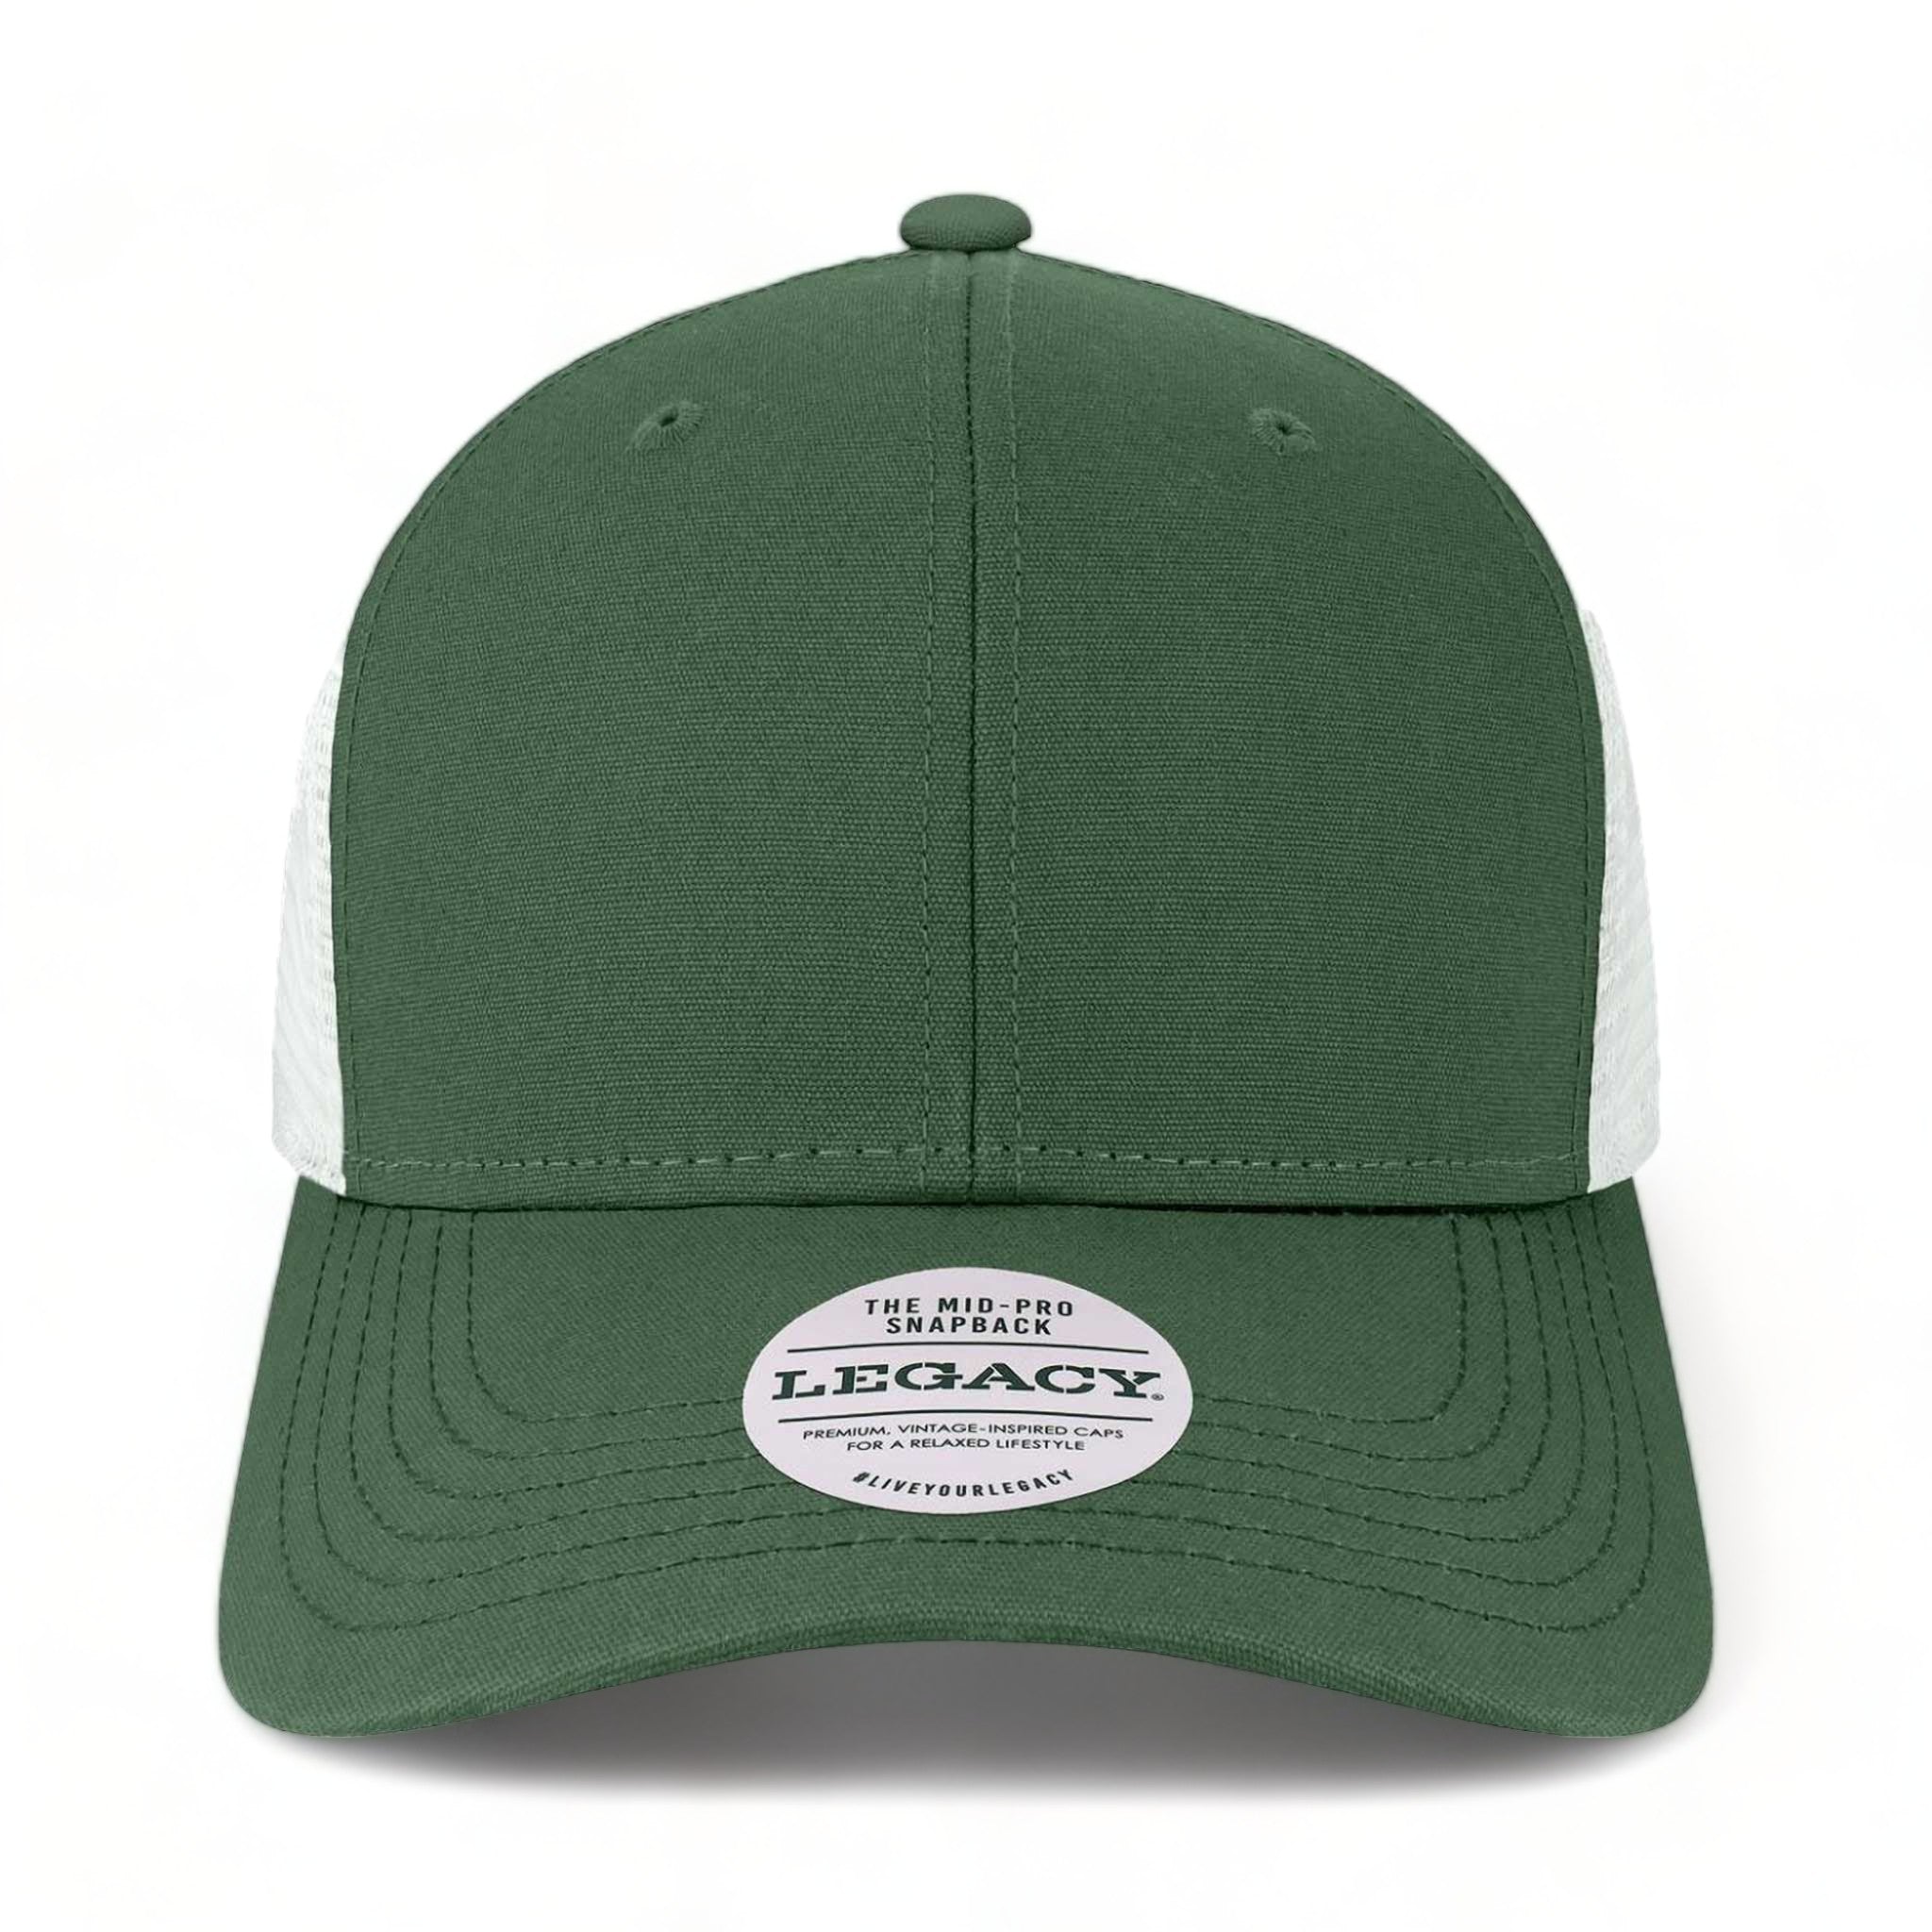 Front view of LEGACY MPS custom hat in dark green and white